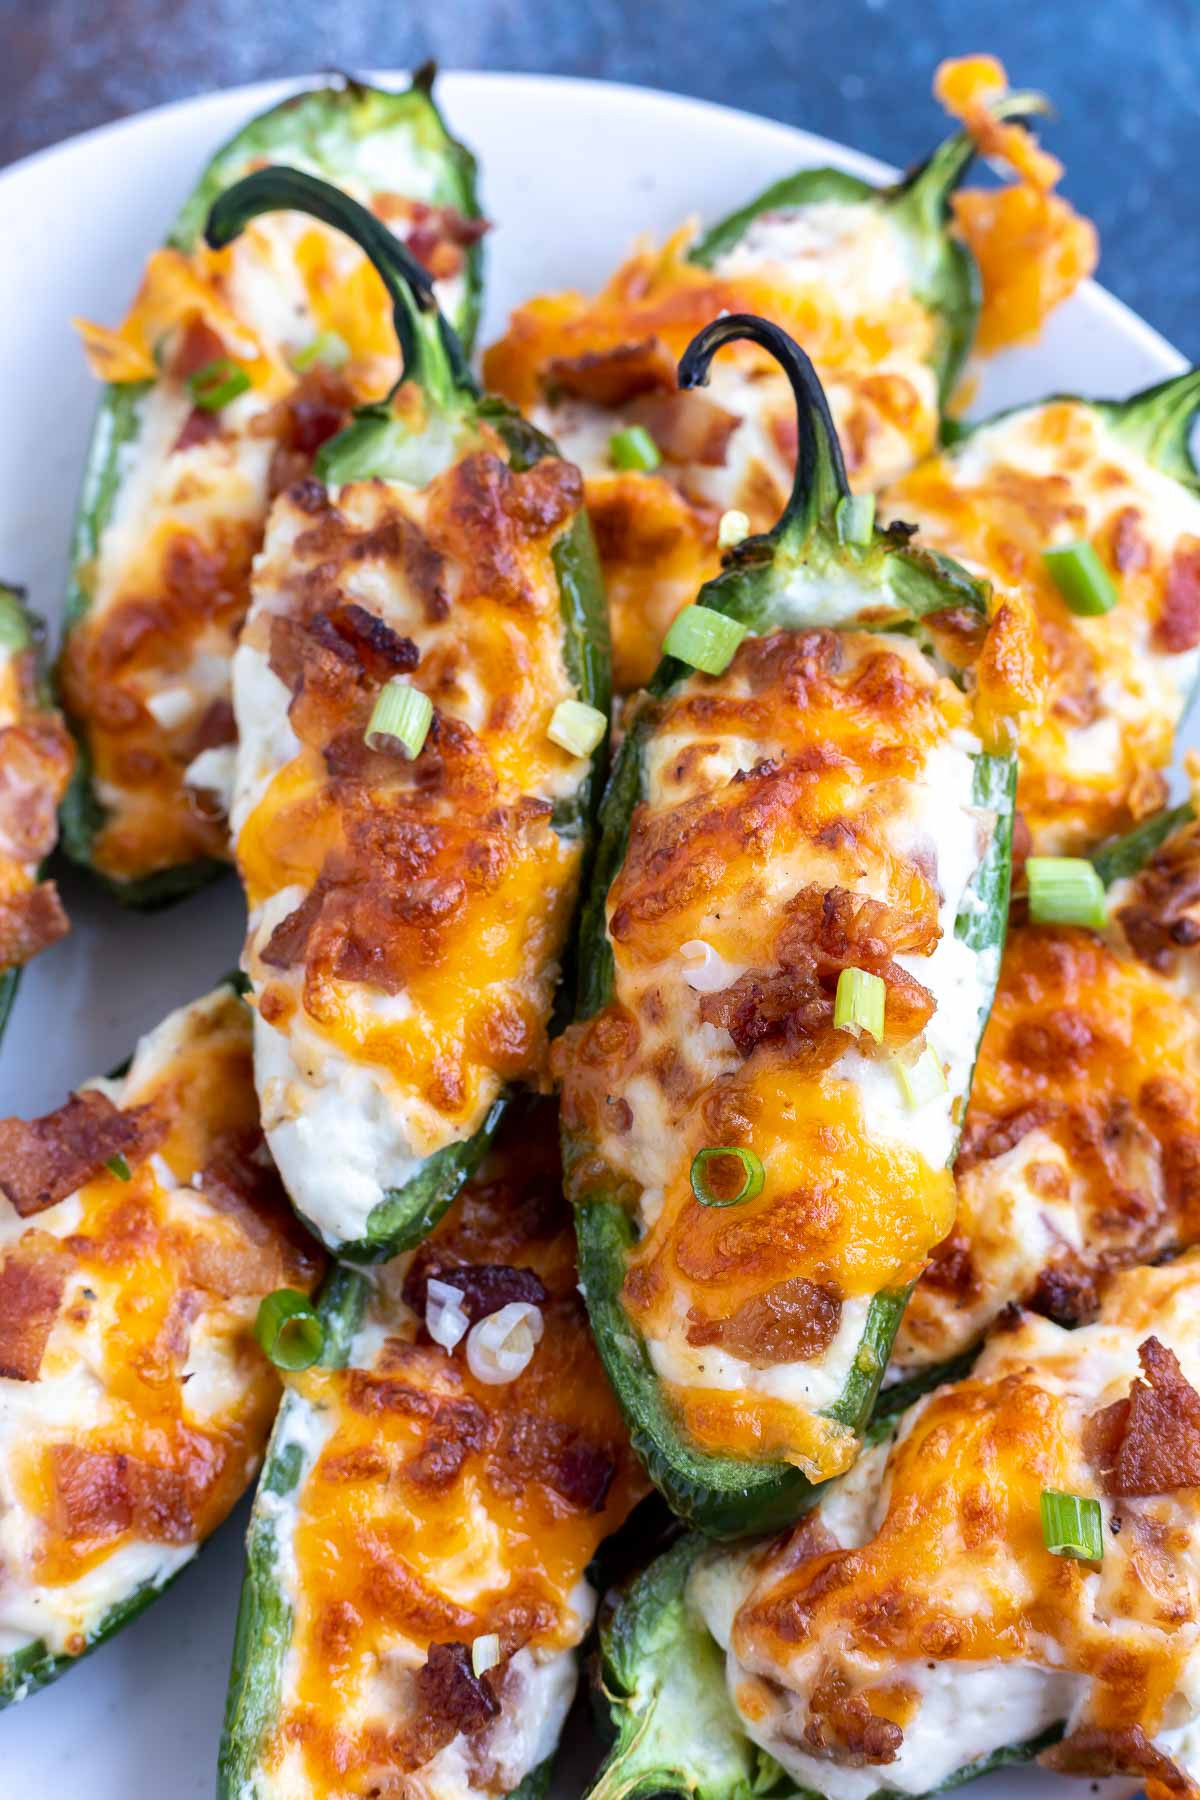 Jalapeno Poppers In Air Fryer Unique Air Fryer Jalapeno Poppers Tasty Air Fryer Recipes